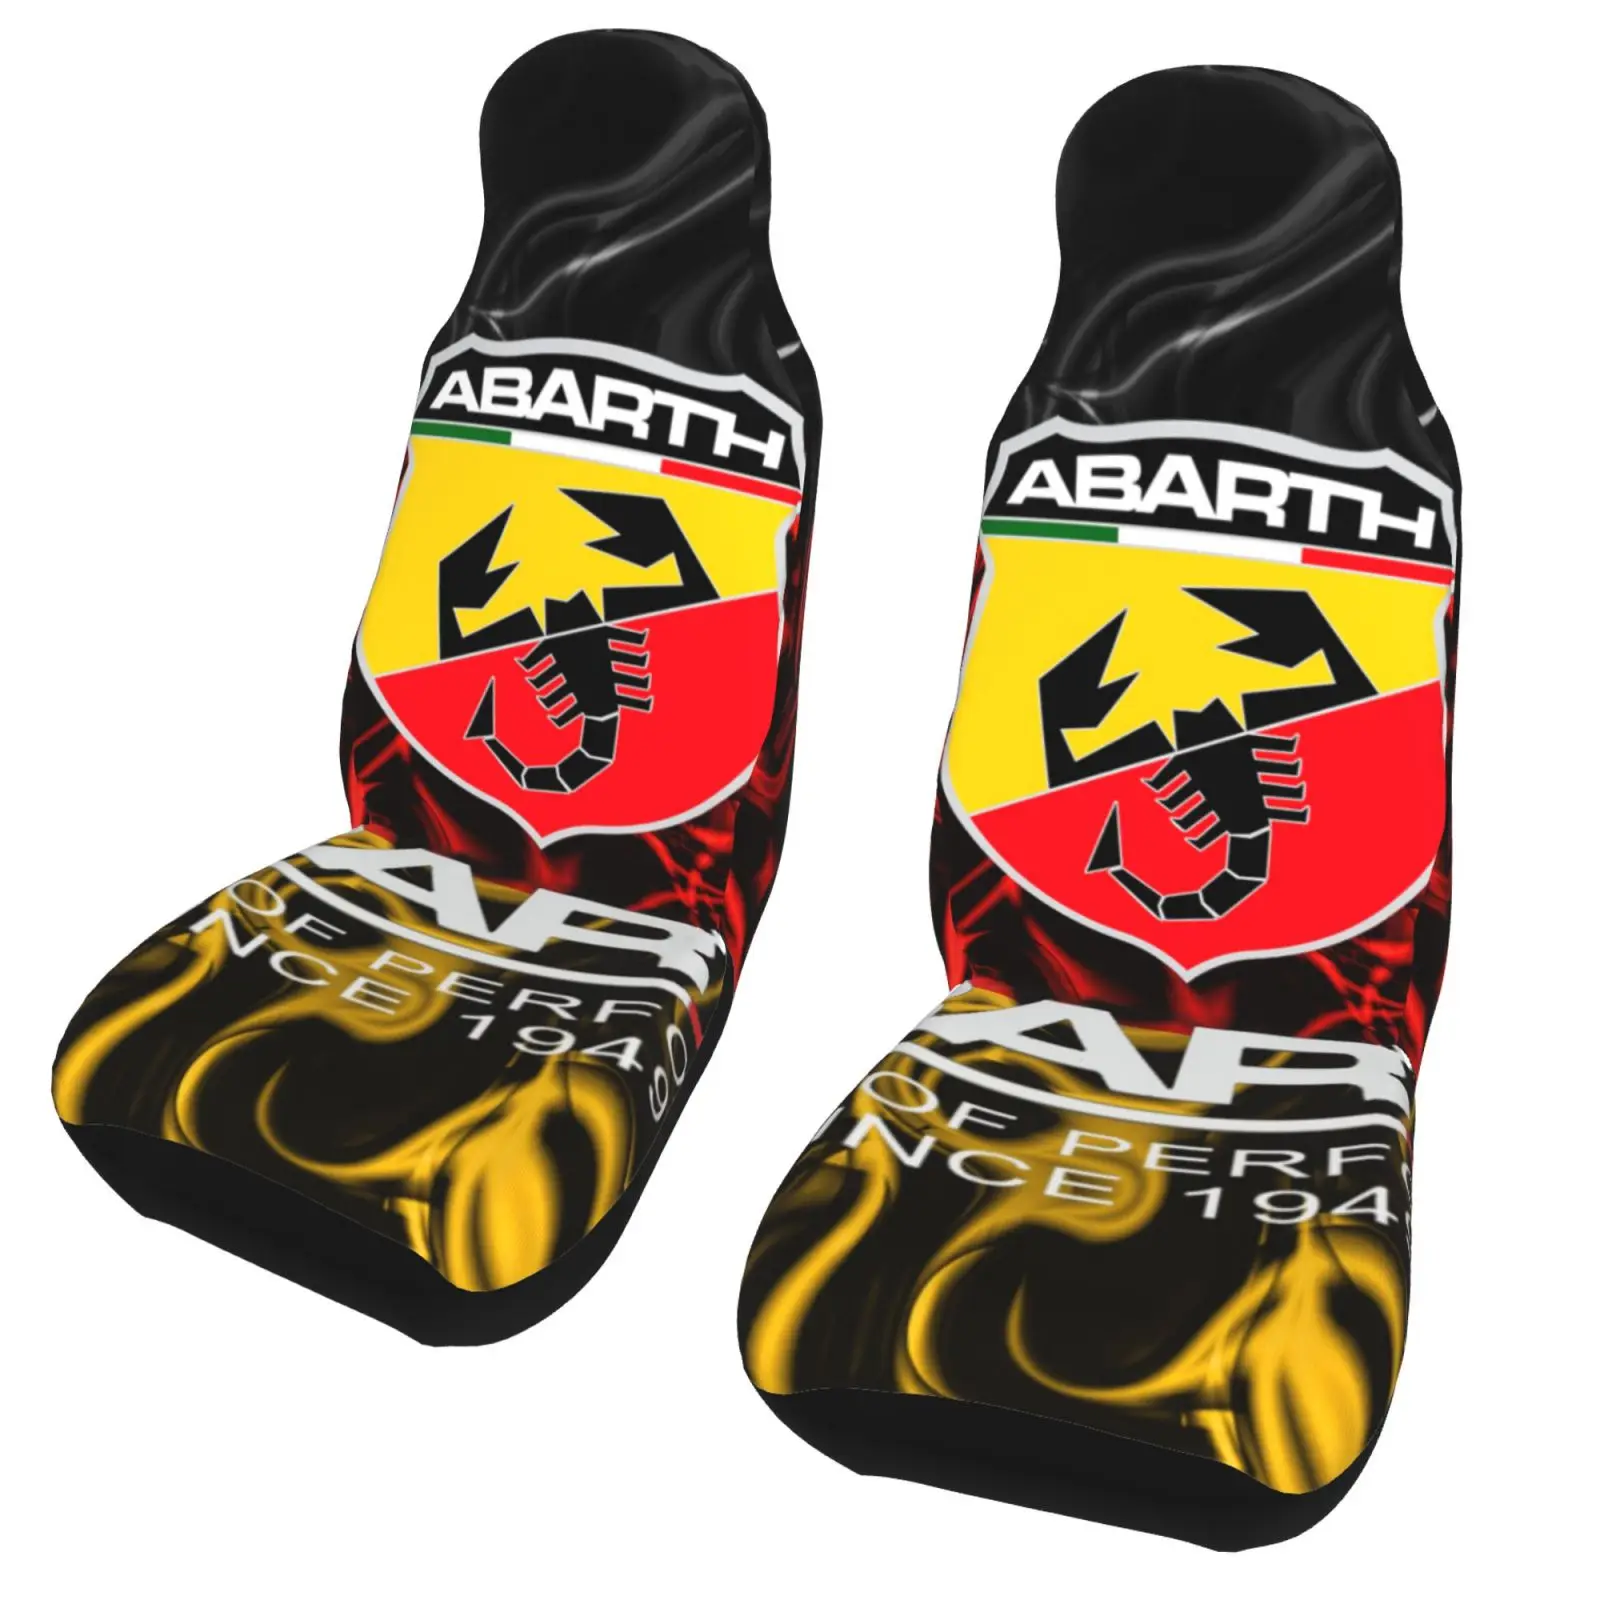 Custom Print Automobile Seat Cover German Flag Abarth Cool Logo Seat Covers for Cars Universal Fits Most Car Seat Covers